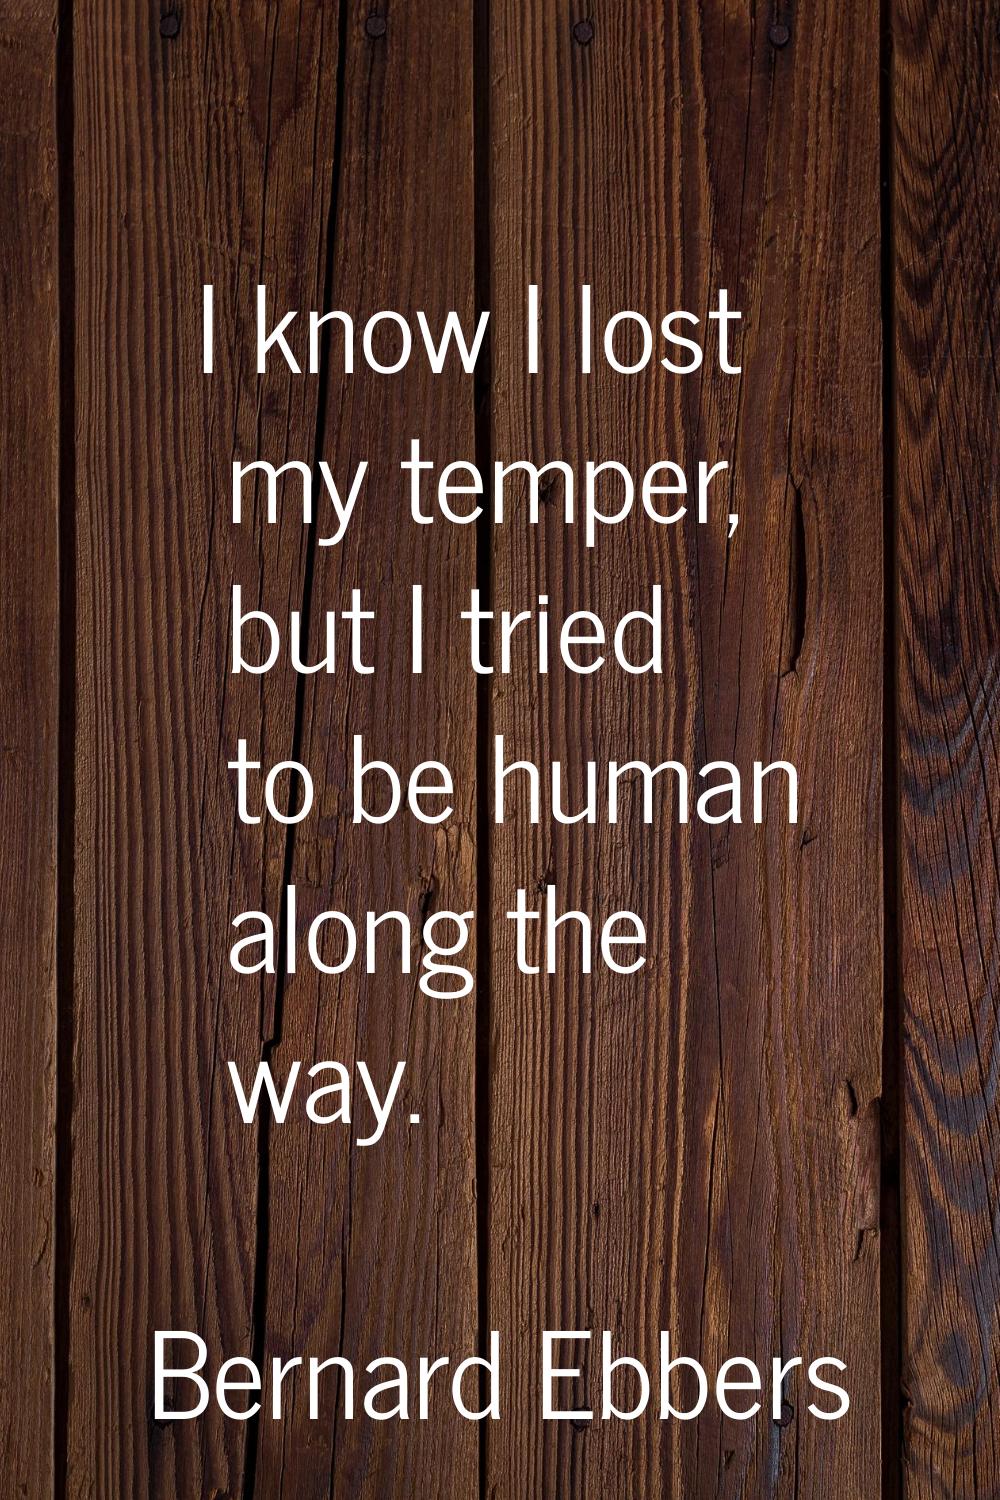 I know I lost my temper, but I tried to be human along the way.